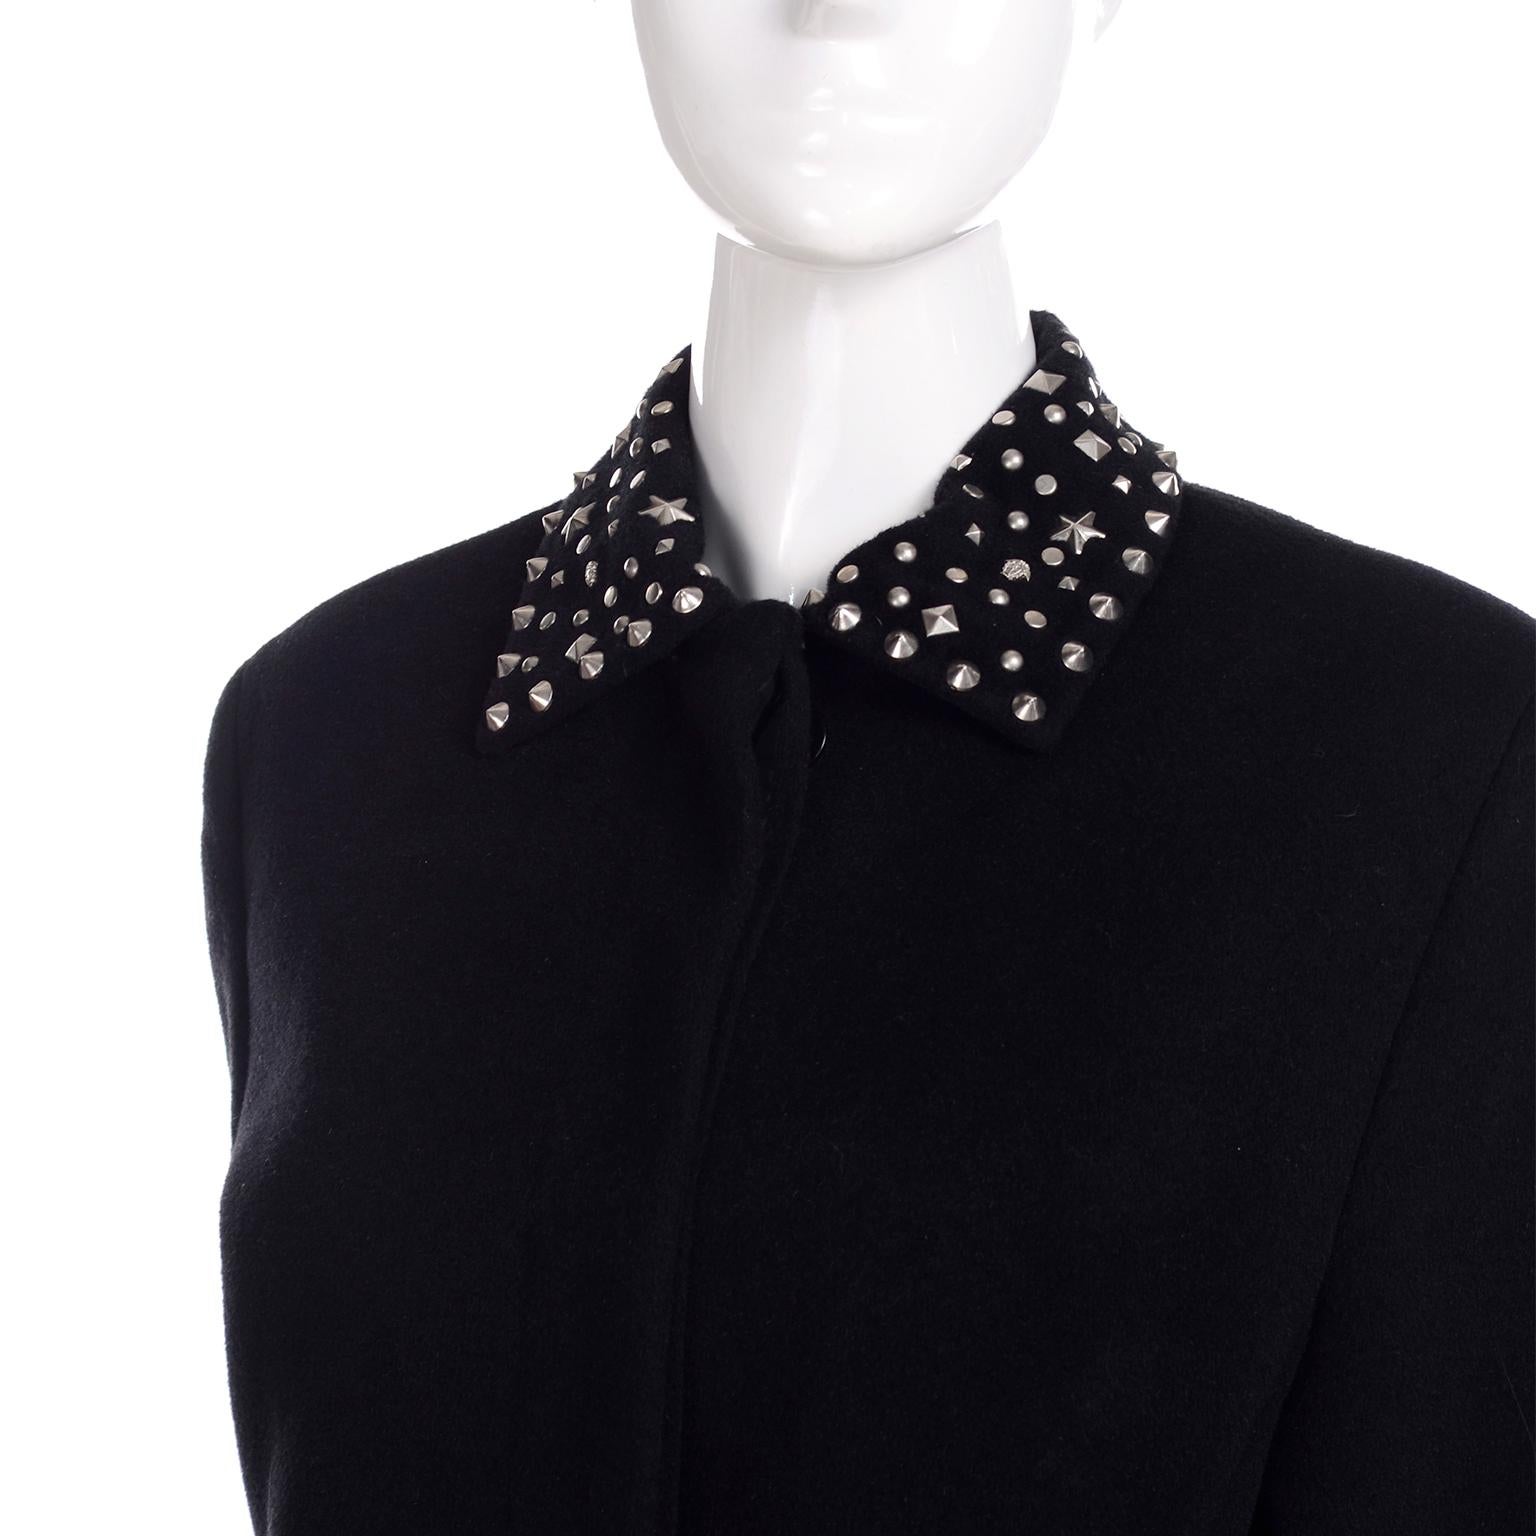 Women's 1990s Gianni Versace Couture Jacket in Wool Cashmere Blend w/ Medusa Head Studs